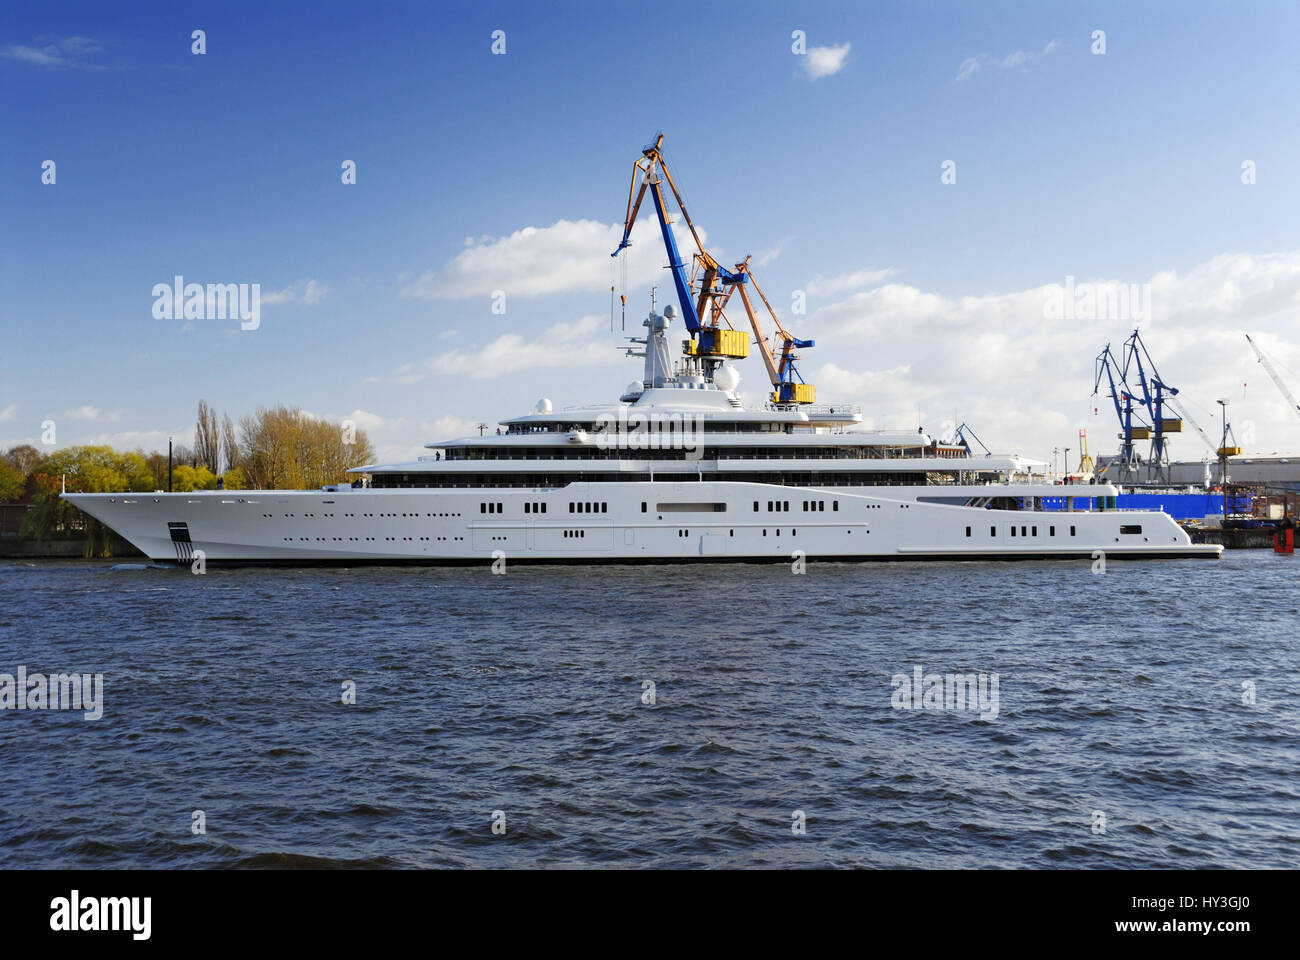 The mega yacht Eclipse of Roman Abramowitsch after the Ausdocken in the Hamburg harbour, Germany, Die Megayacht Eclipse von Roman Abramowitsch nach de Stock Photo